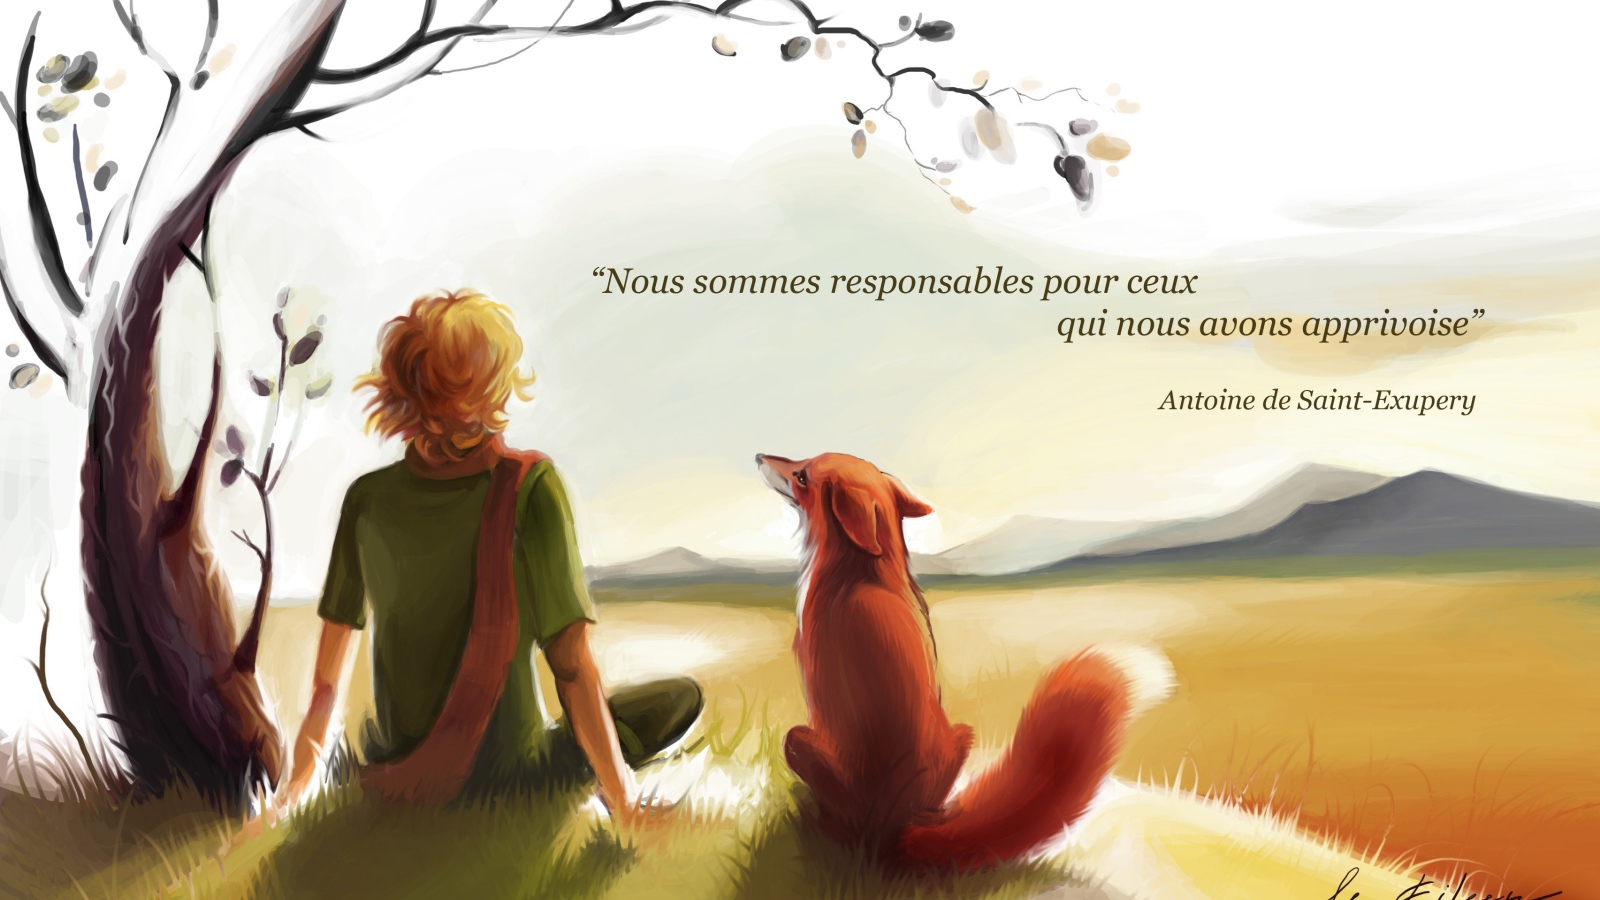 The Little Prince with fox story